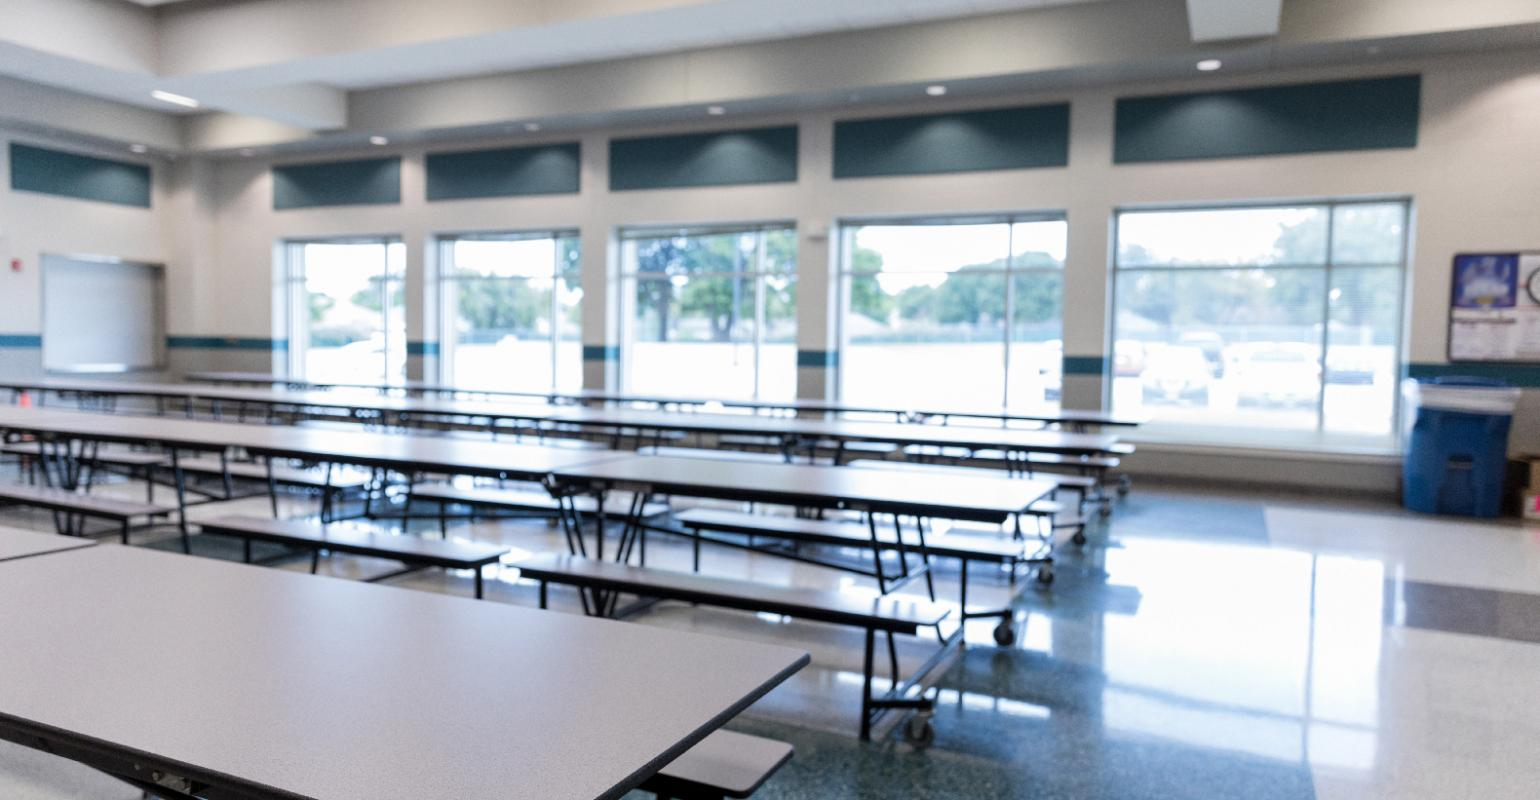 High Quality School Cafeteria Blank Meme Template